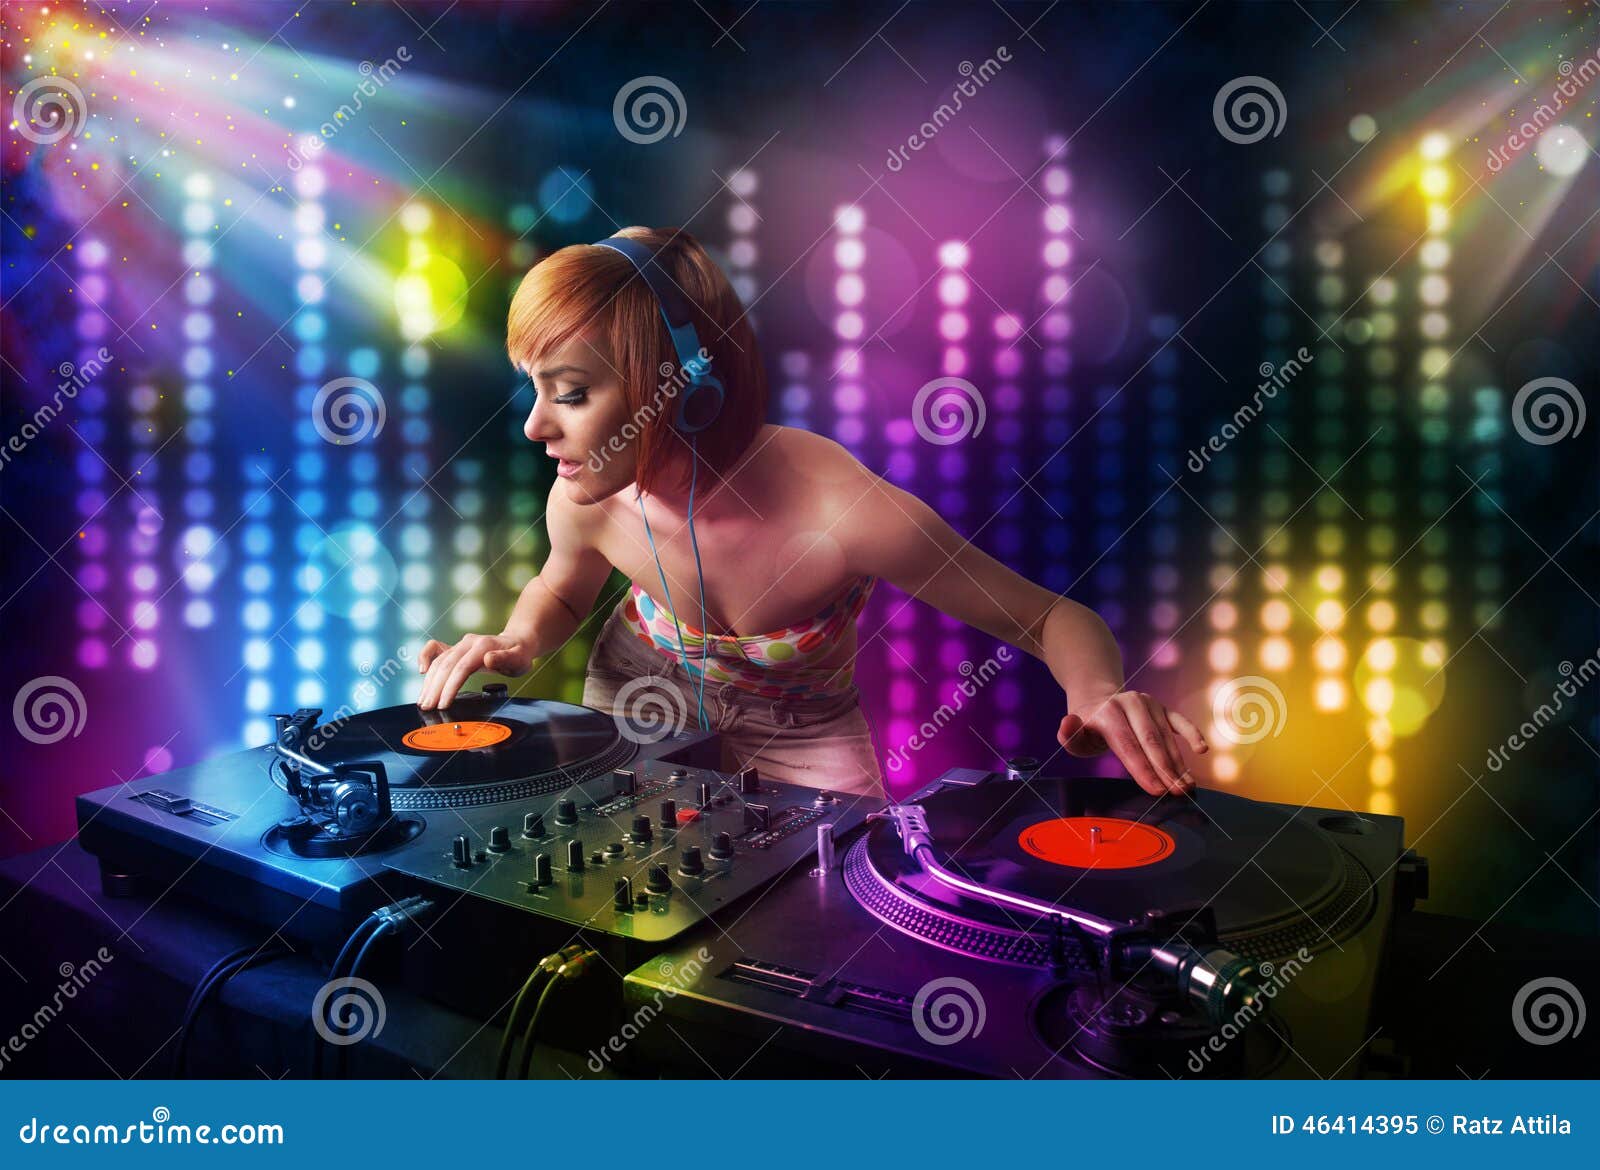 Dj Girl Playing Songs in a Disco with Light Show Stock Image - Image of ...